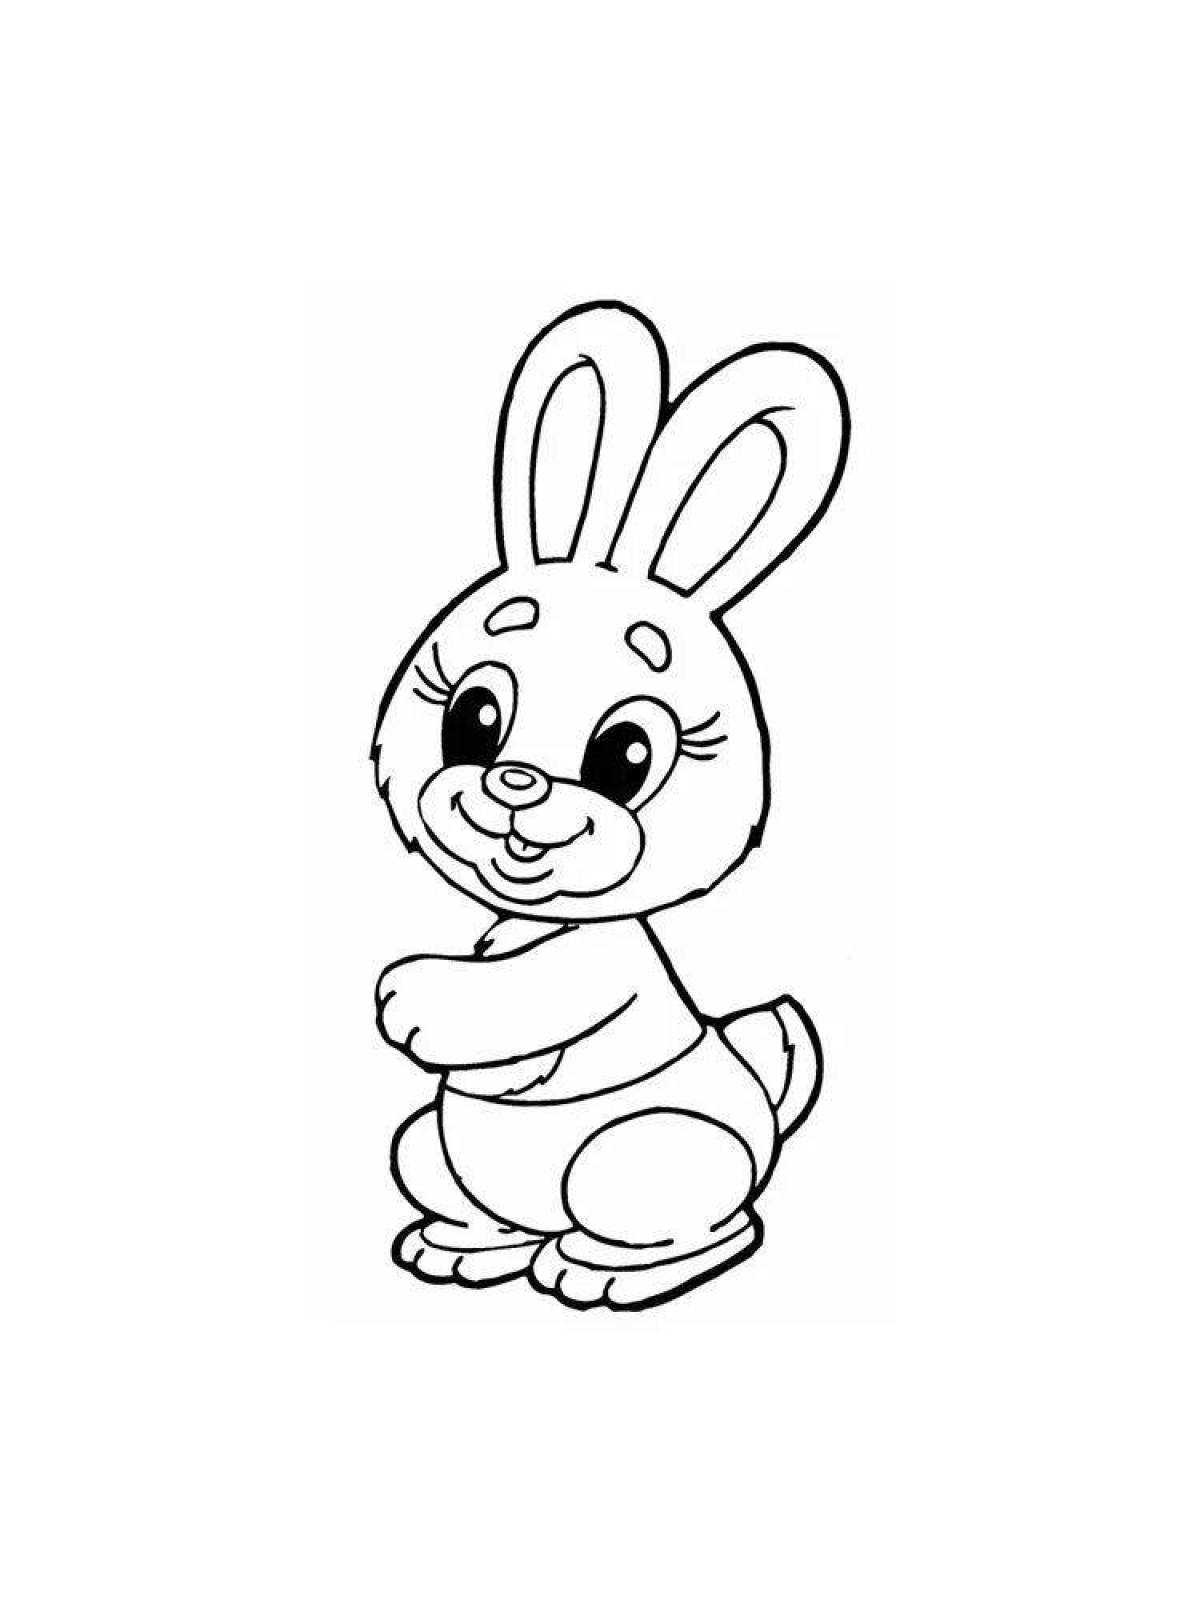 Creative coloring drawing of a hare for children